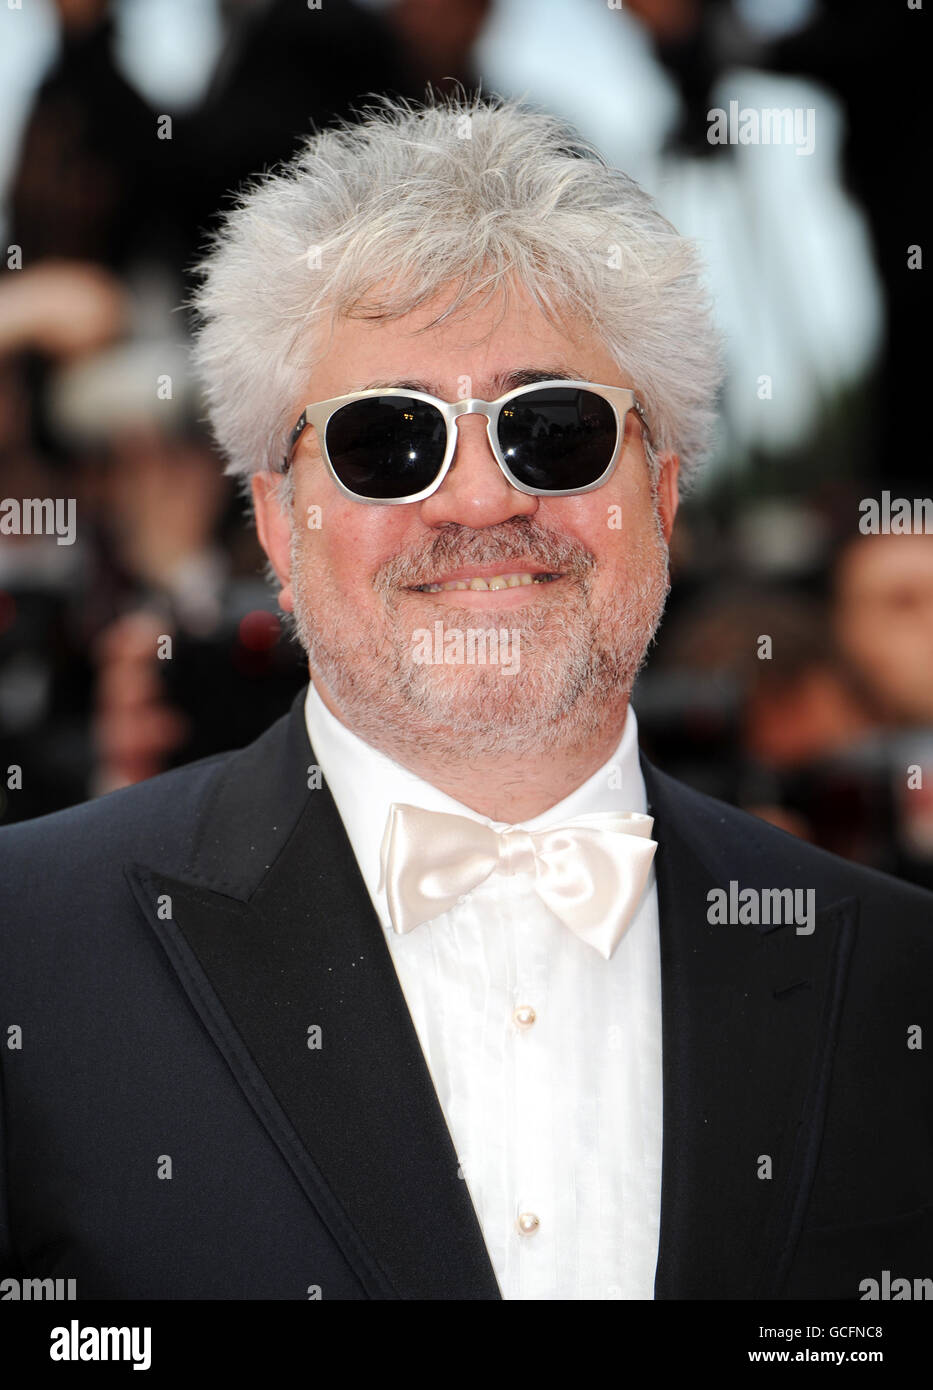 Pedro Almodovar arrives for the premiere of Woody Allen's film You Will Meet A Tall Dark Stranger, at the 63rd Cannes Film Festival, France. Stock Photo